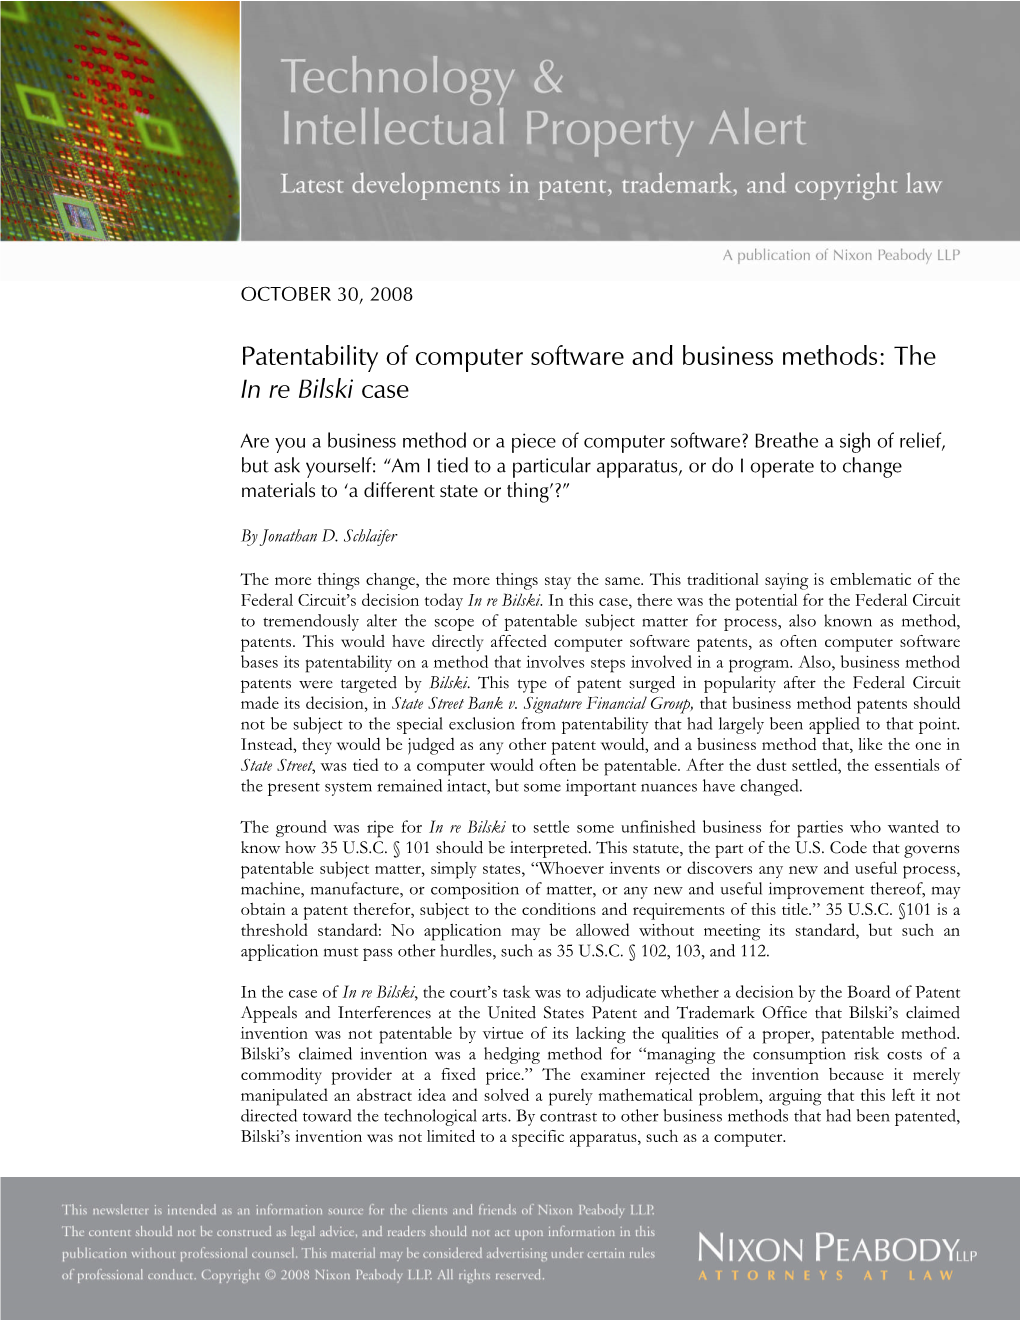 Patentability of Computer Software and Business Methods: the in Re Bilski Case